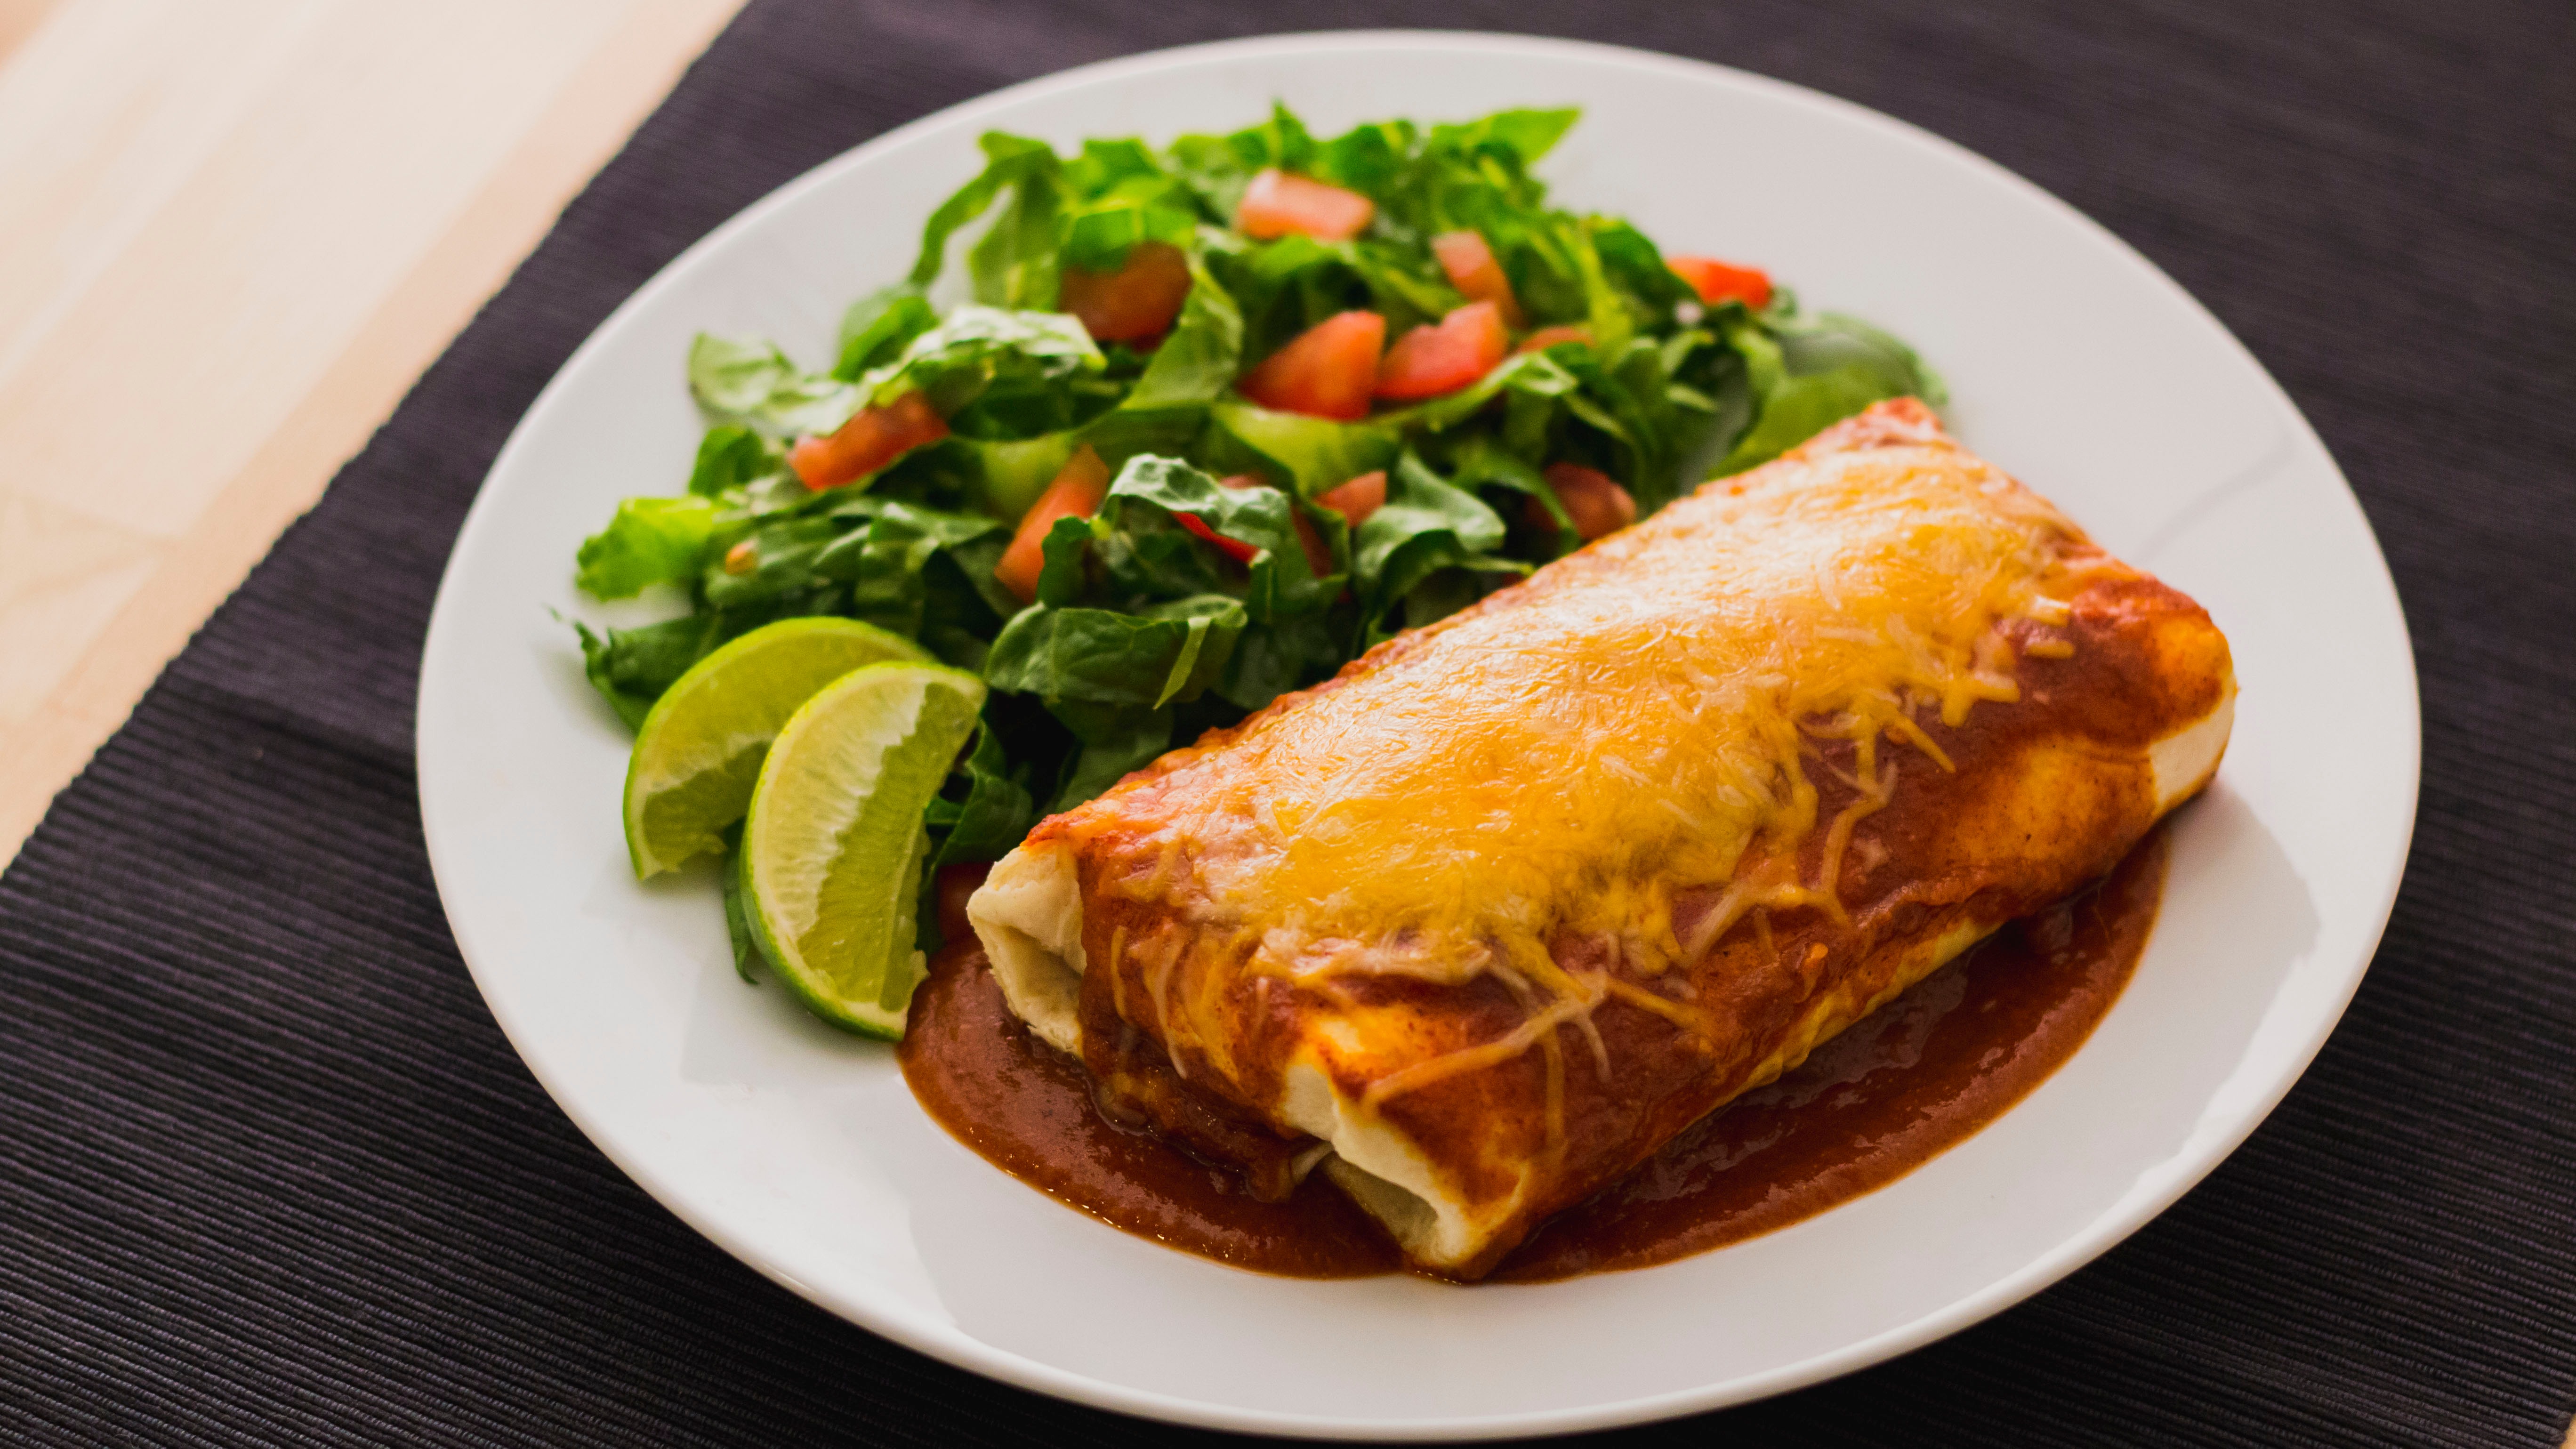 Smothered Burritos Recipe: How to Make It